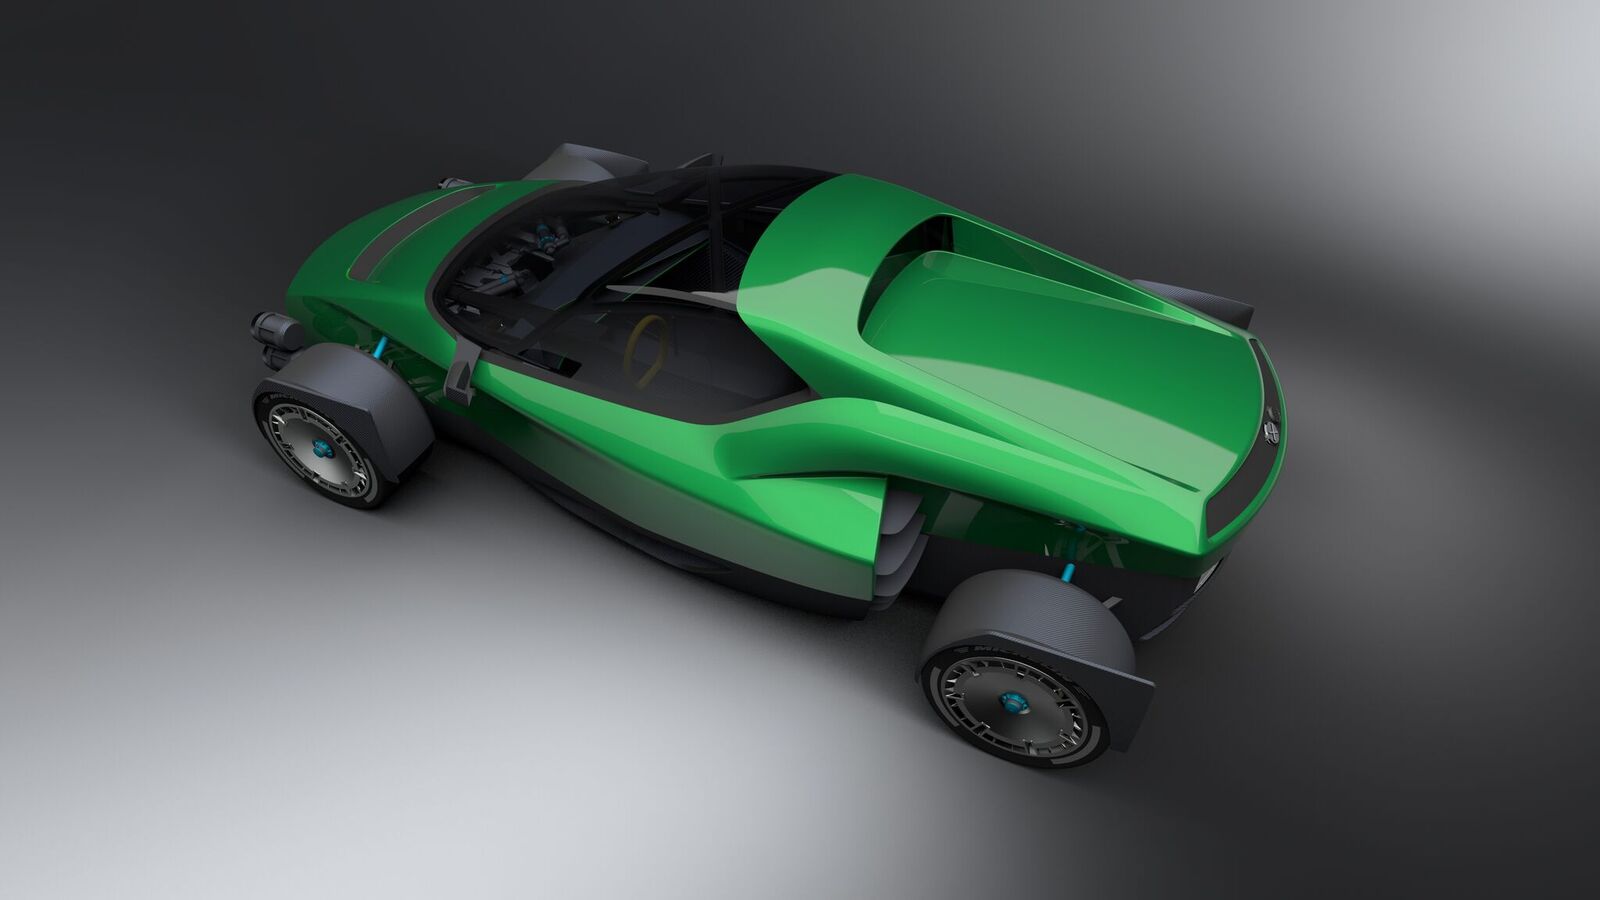 The-Electric-Supercar-XING-Mobility-1